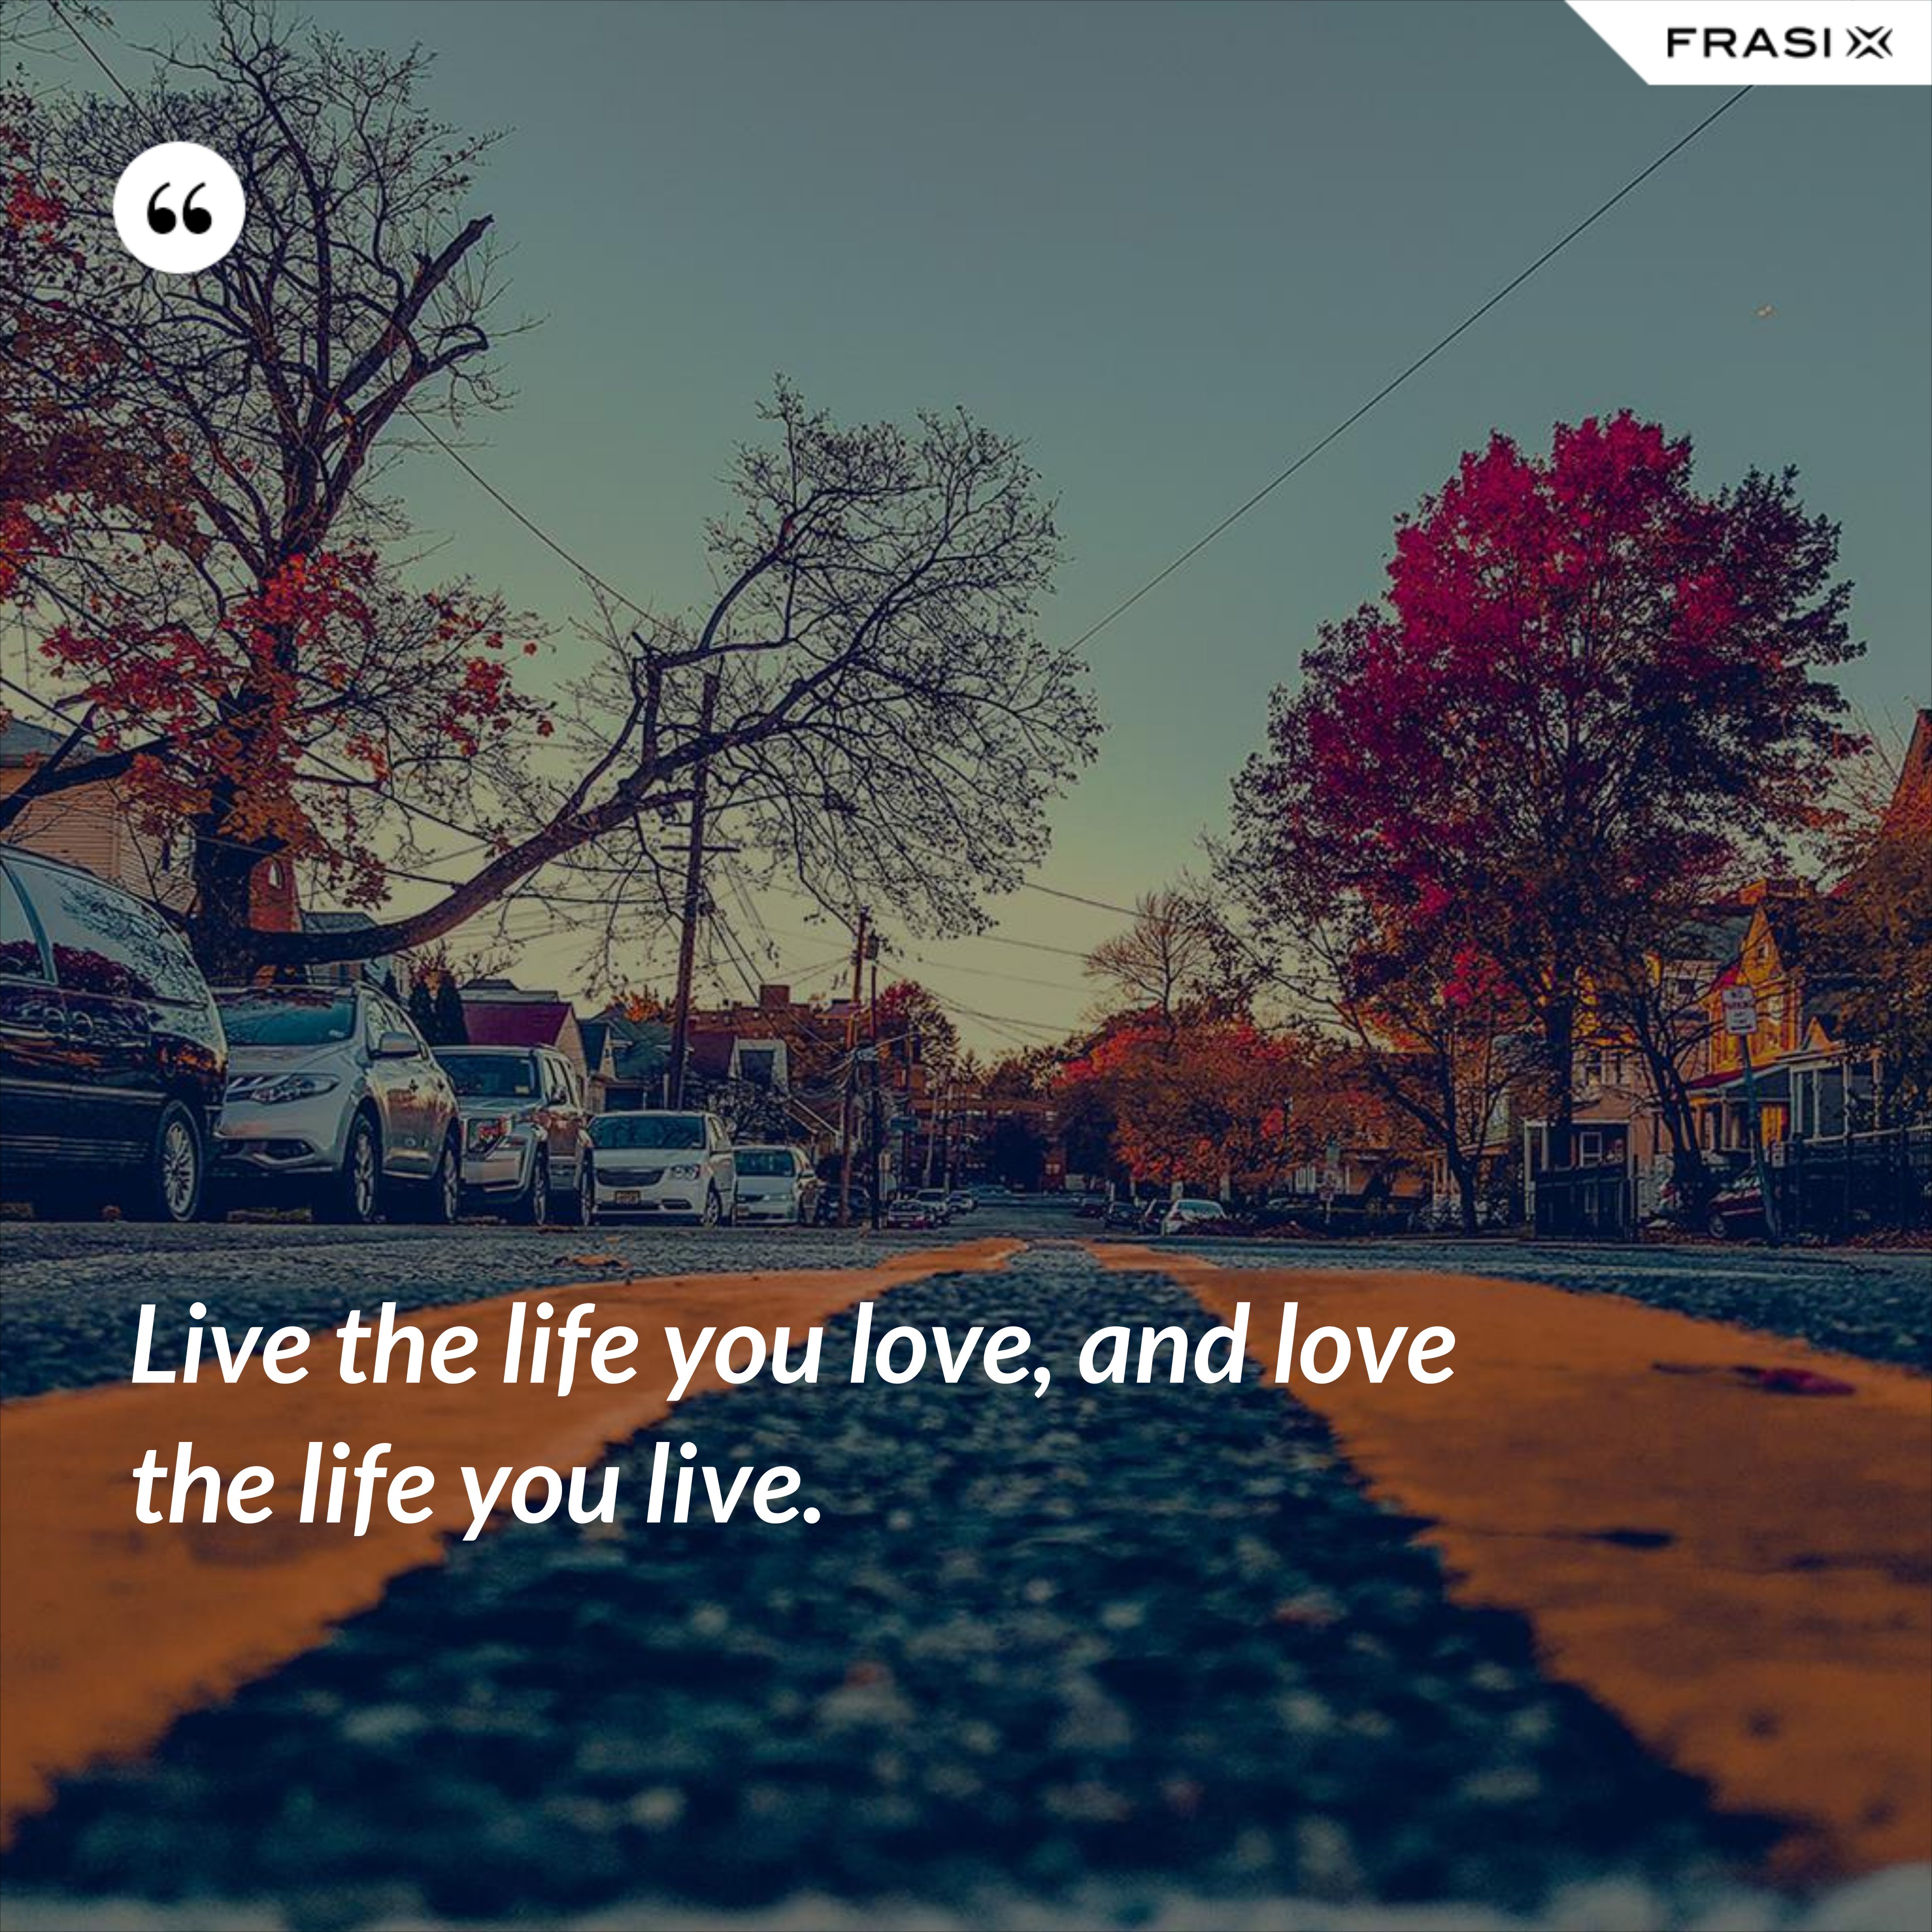 Live the life you love, and love the life you live. - Anonimo